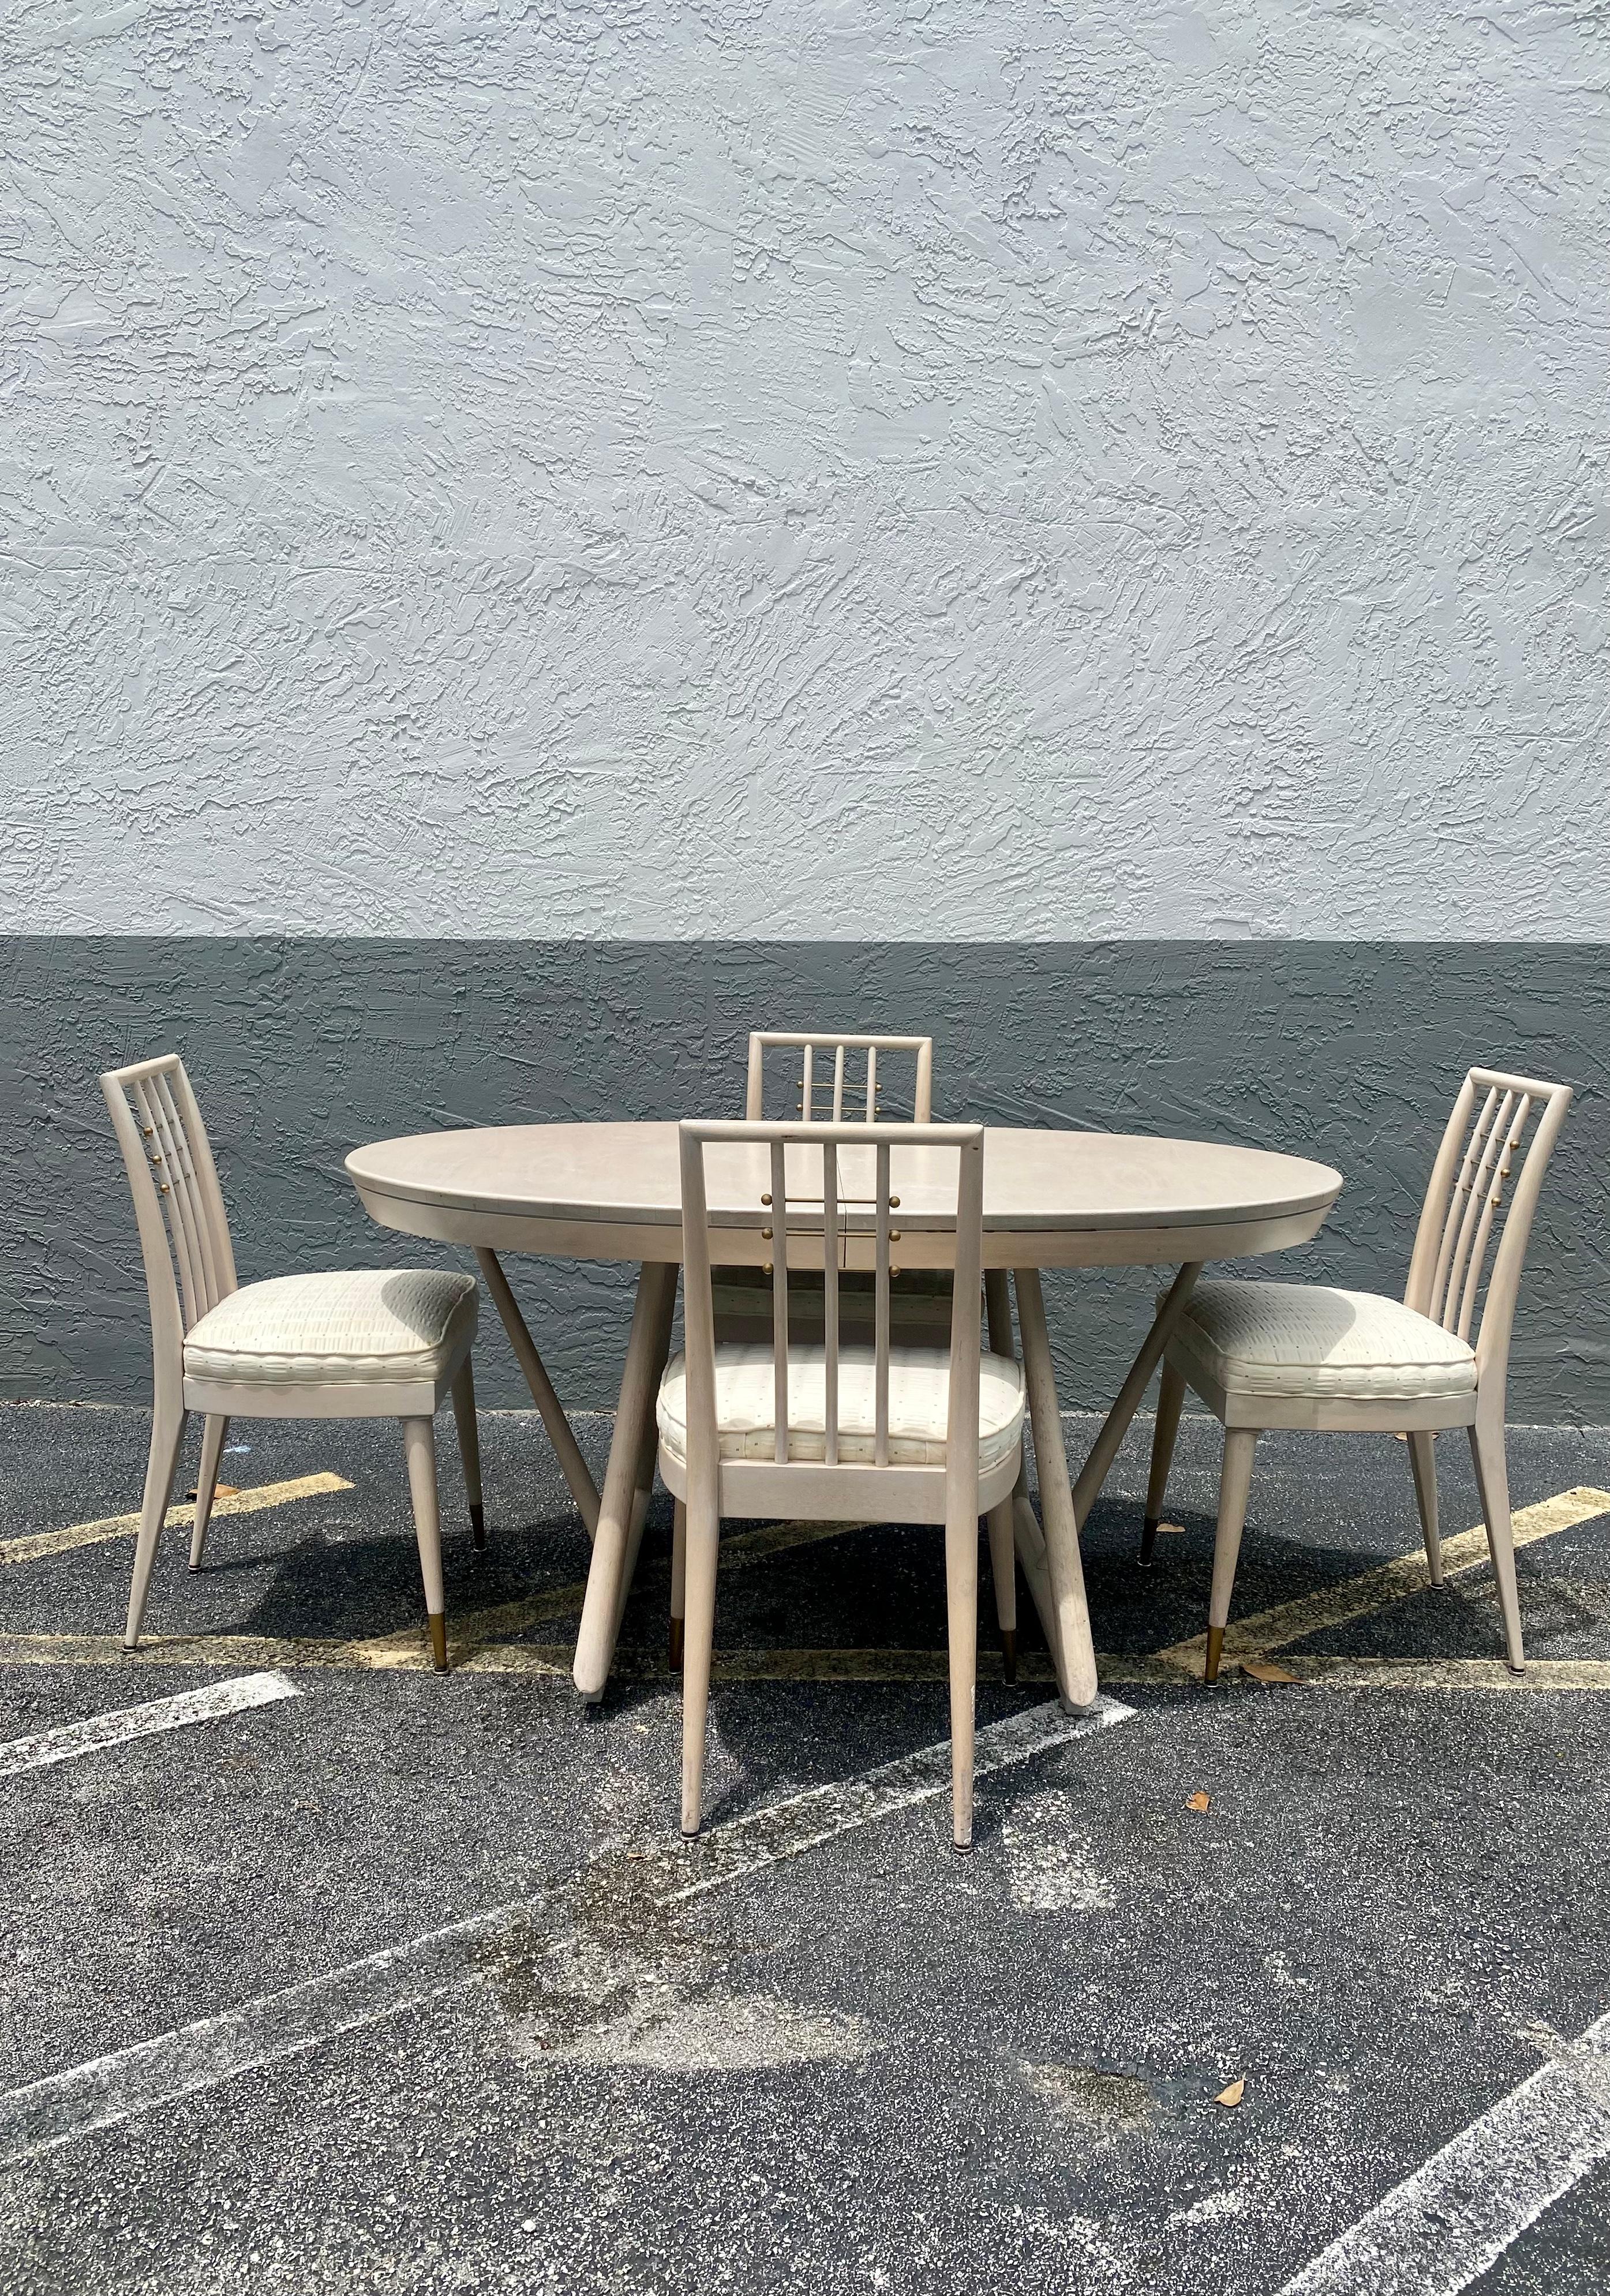 1960s Mid Century Sculptural Extendable Oval Dining Set In Good Condition For Sale In Fort Lauderdale, FL